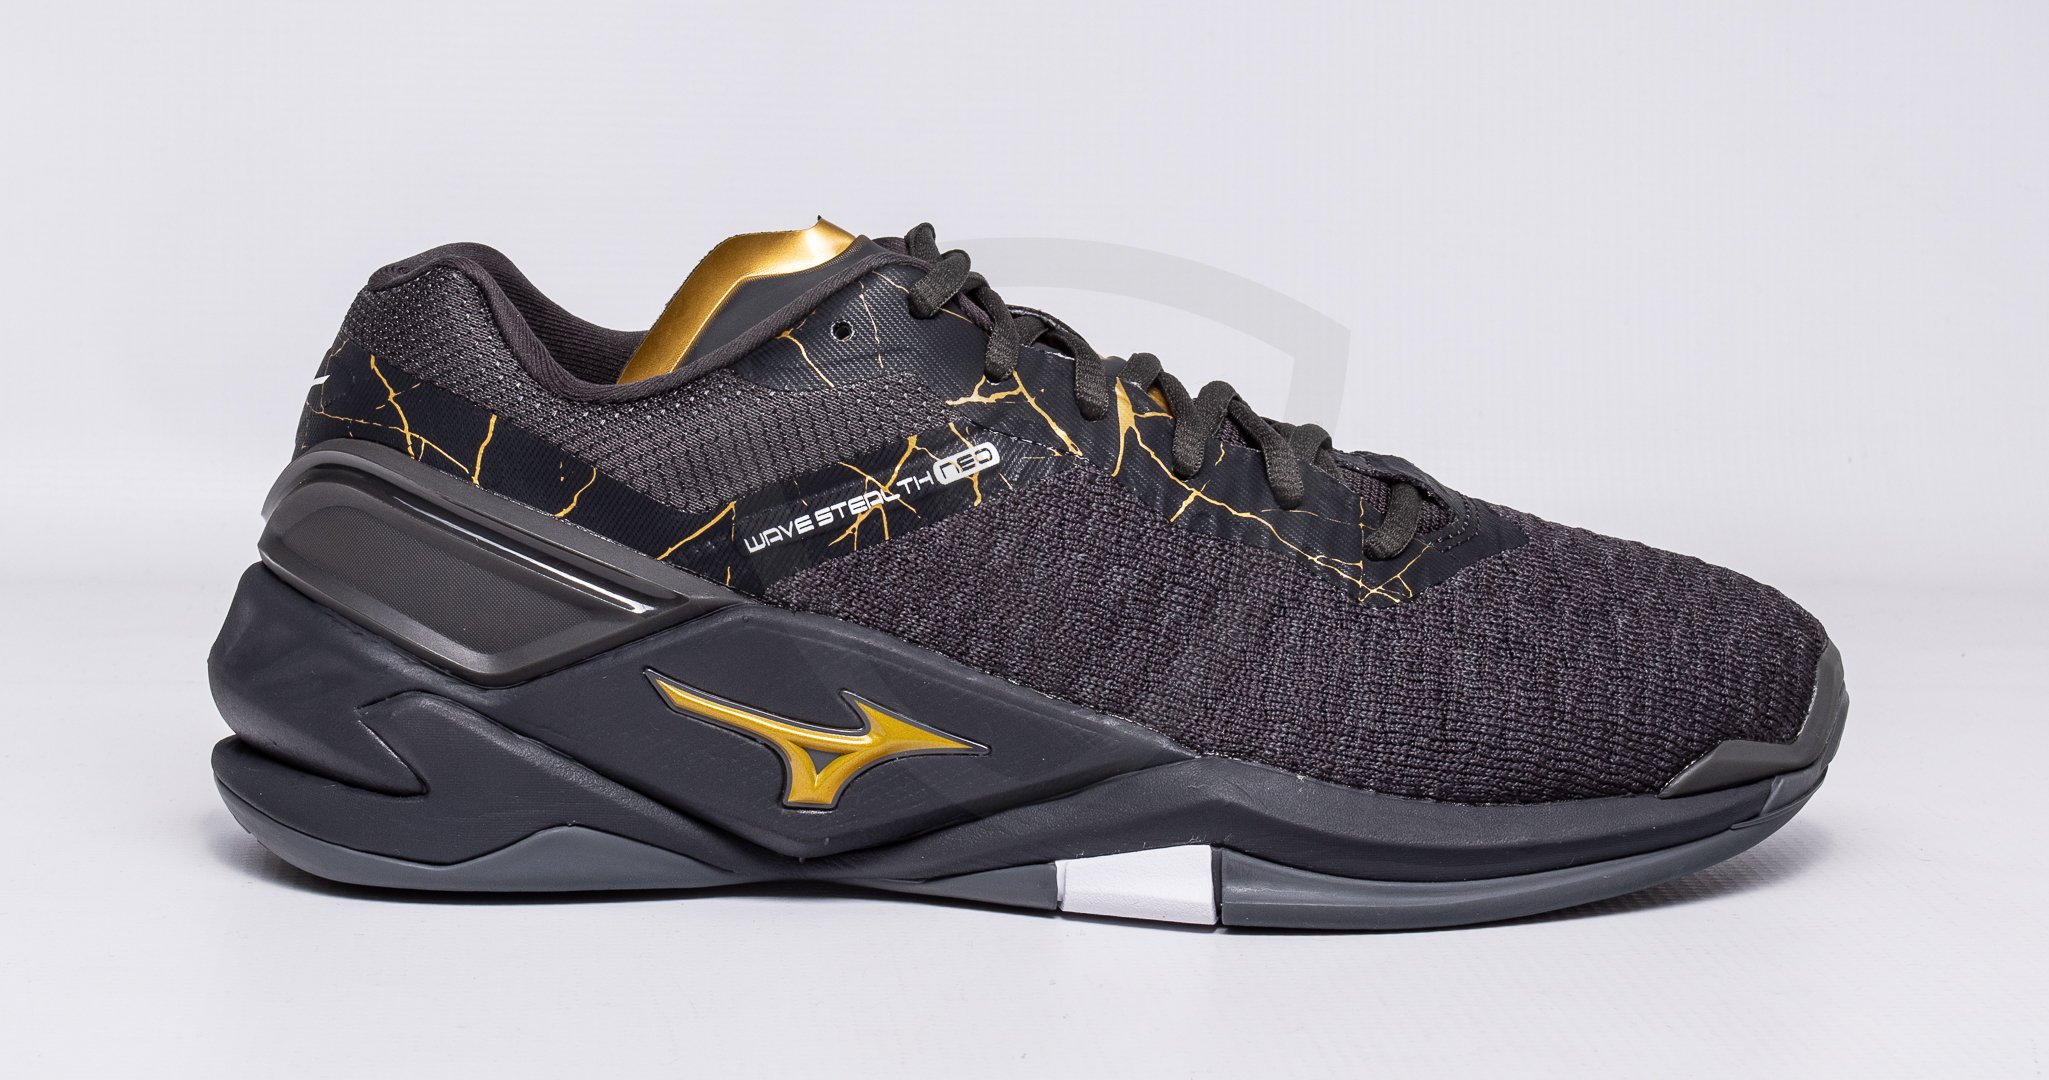 Mizuno WAVE STEALTH NEO BlkOyster-MPGold-IronGat UK 11,5 / US 12,5 / EUR 46,5 / CM 30,5